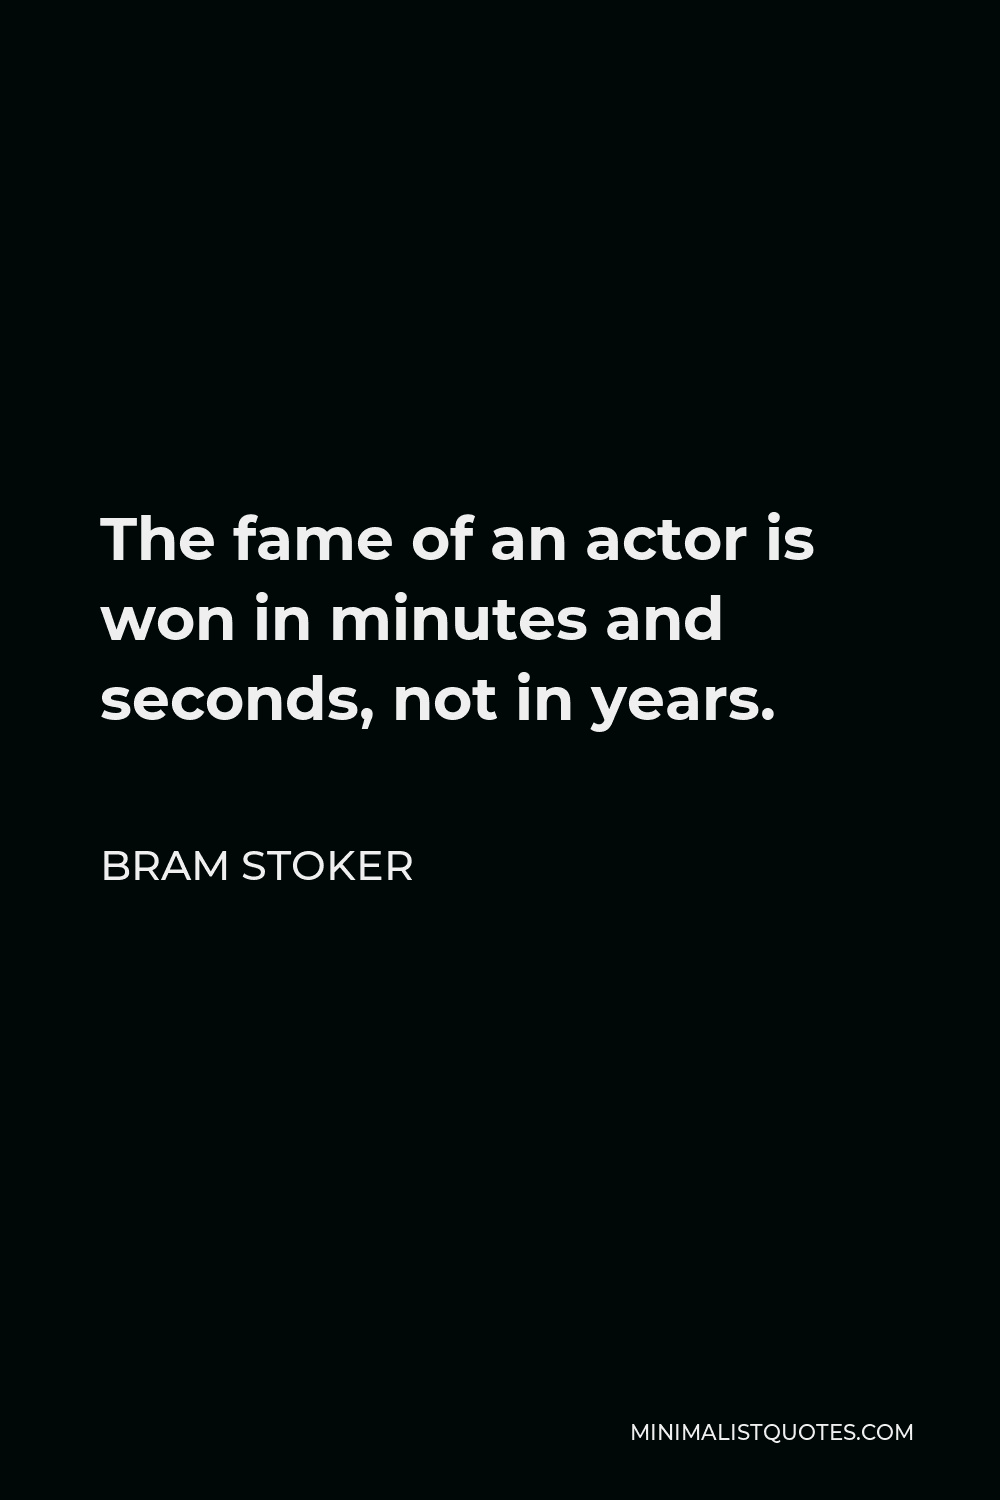 Bram Stoker Quote - The fame of an actor is won in minutes and seconds, not in years.